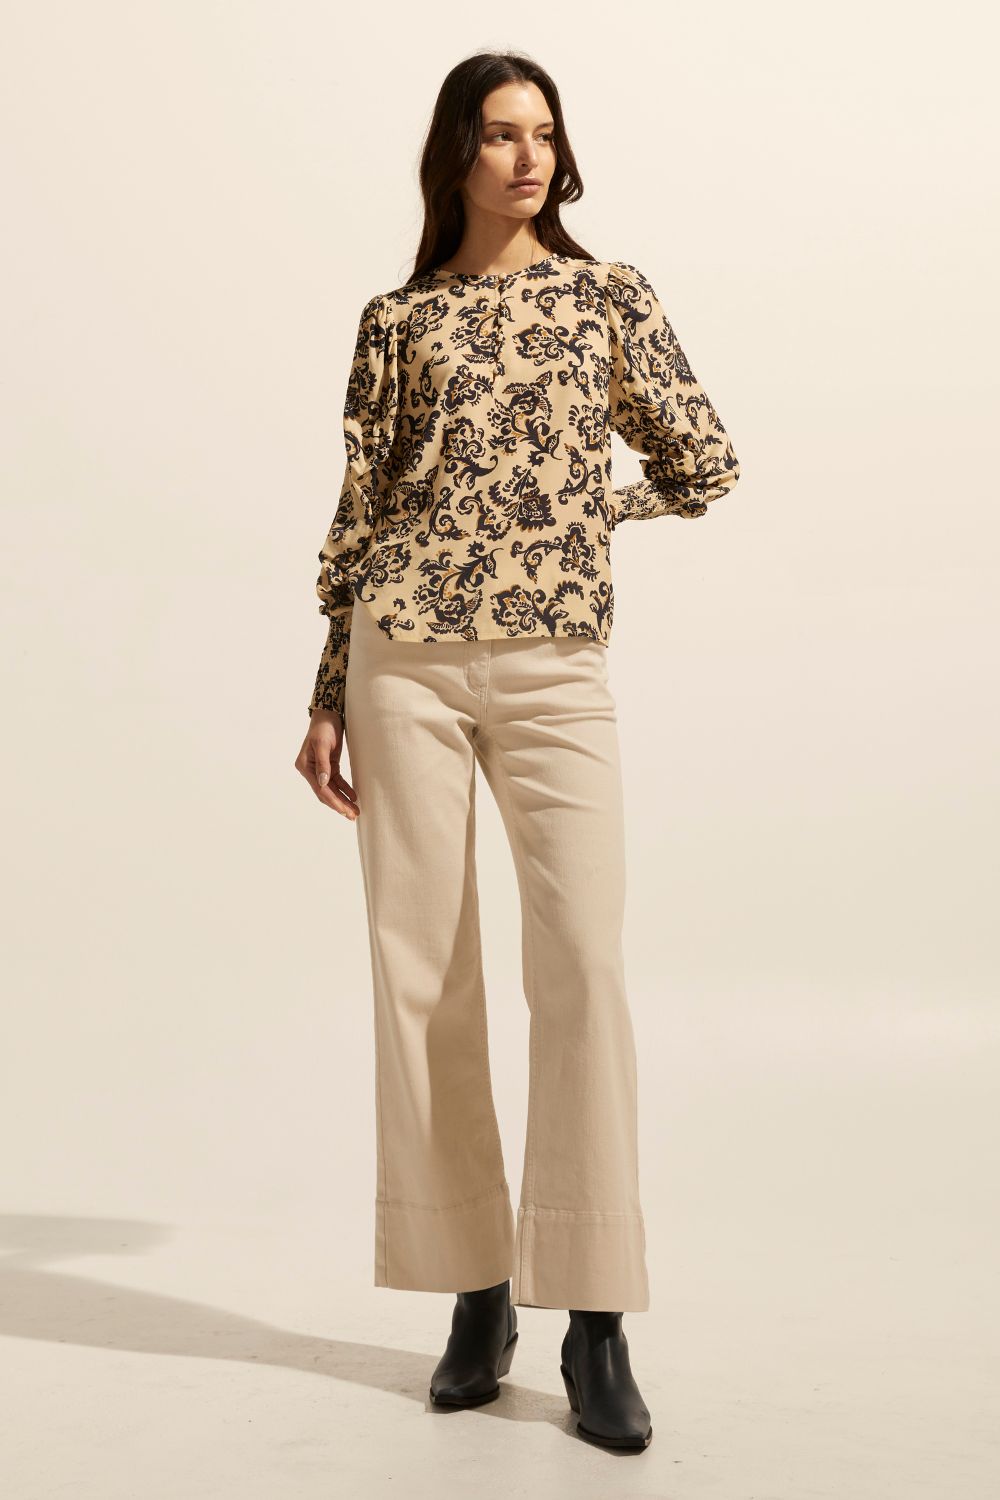 ochre, floral, yellow, top, long sleeve, shirred cuffs, blouson sleeve, covered buttons round neckline, front image